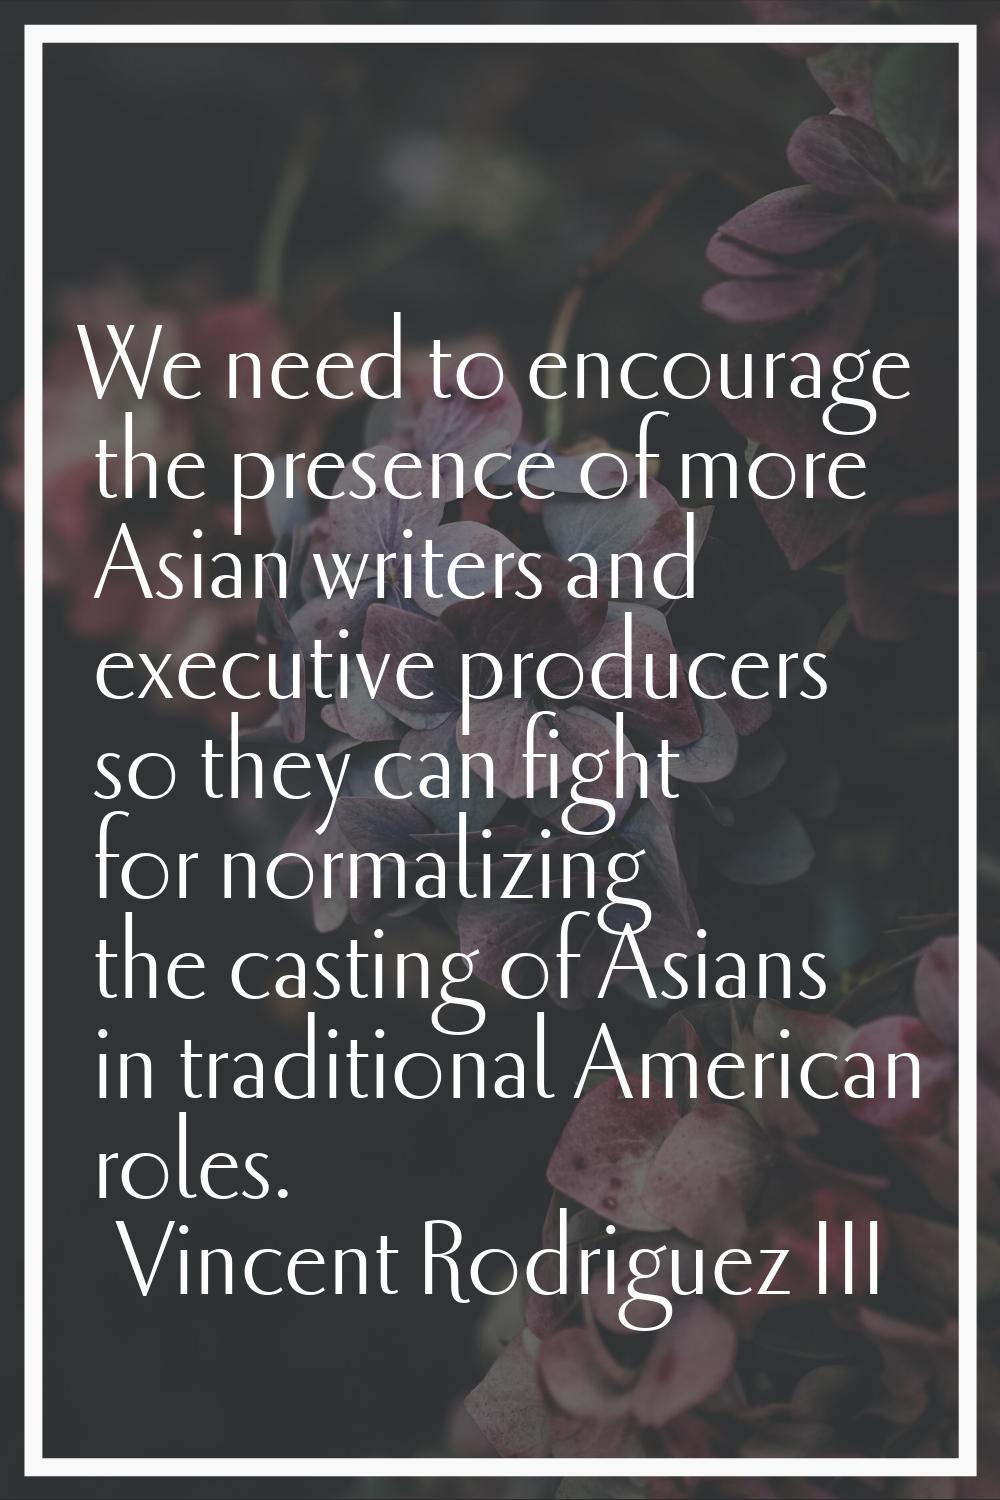 We need to encourage the presence of more Asian writers and executive producers so they can fight f